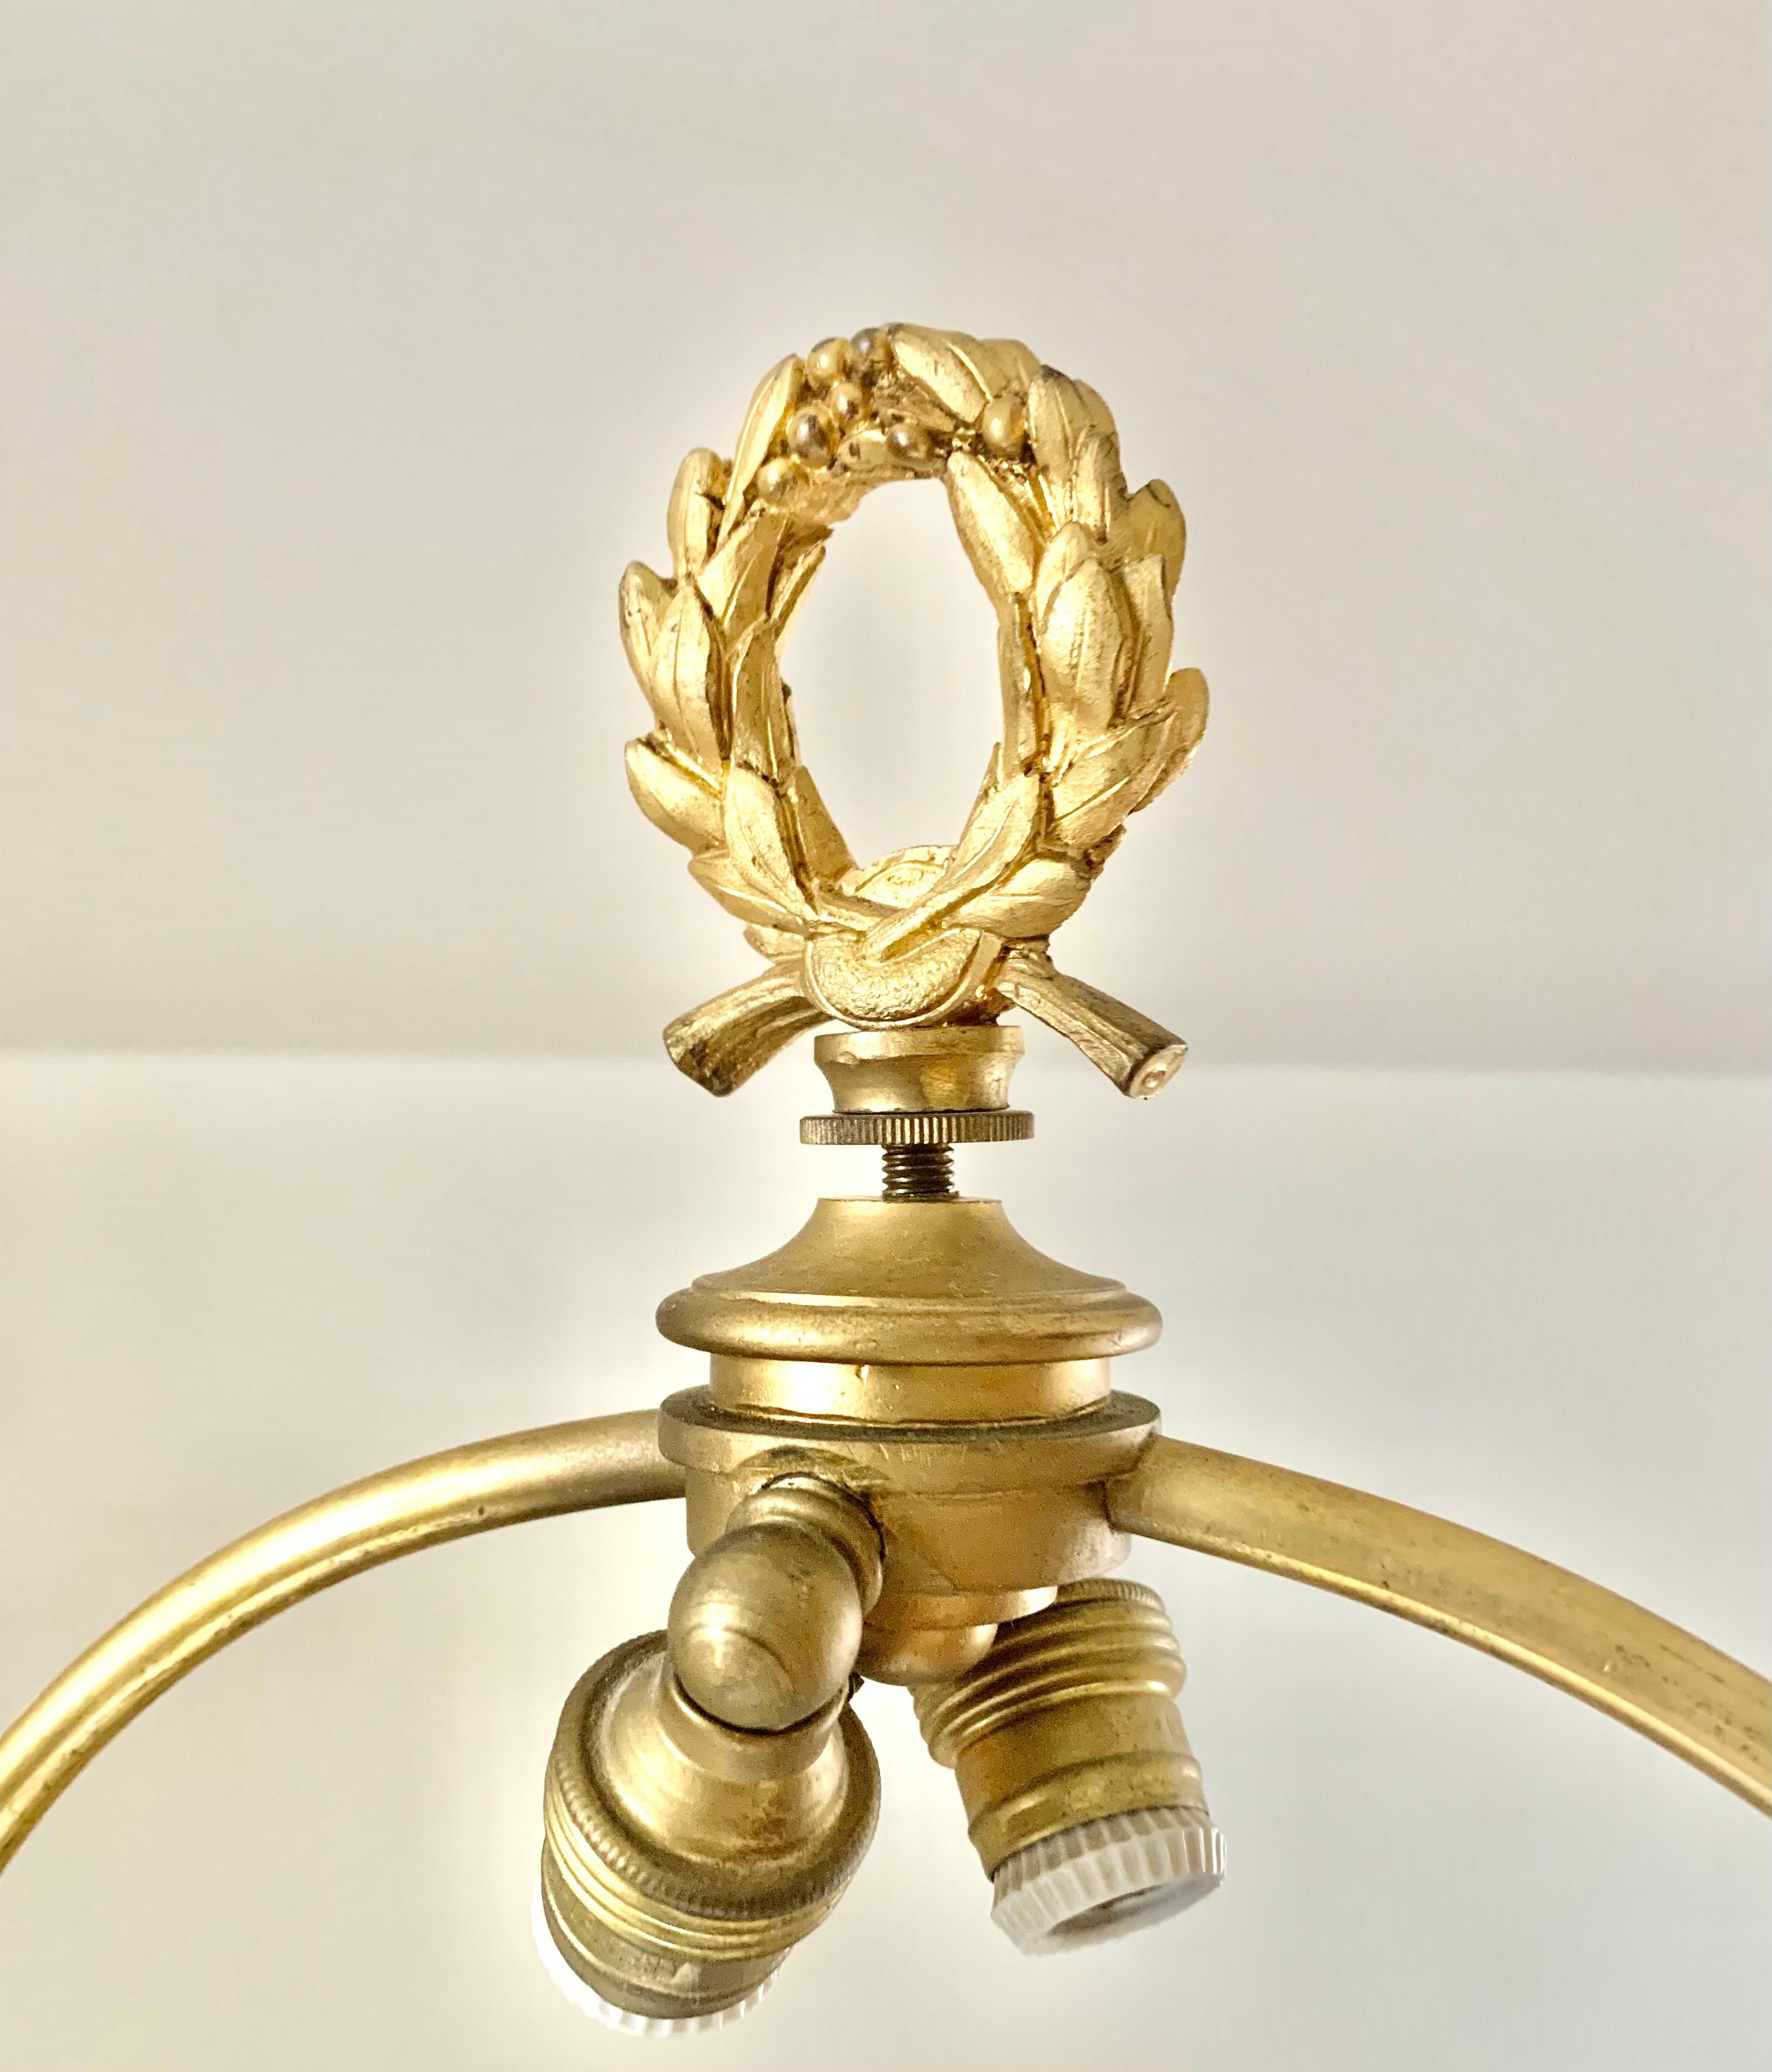 Fine Antique French Neoclassical Style Gilt and Patinated Bronze Desk Lamp For Sale 4